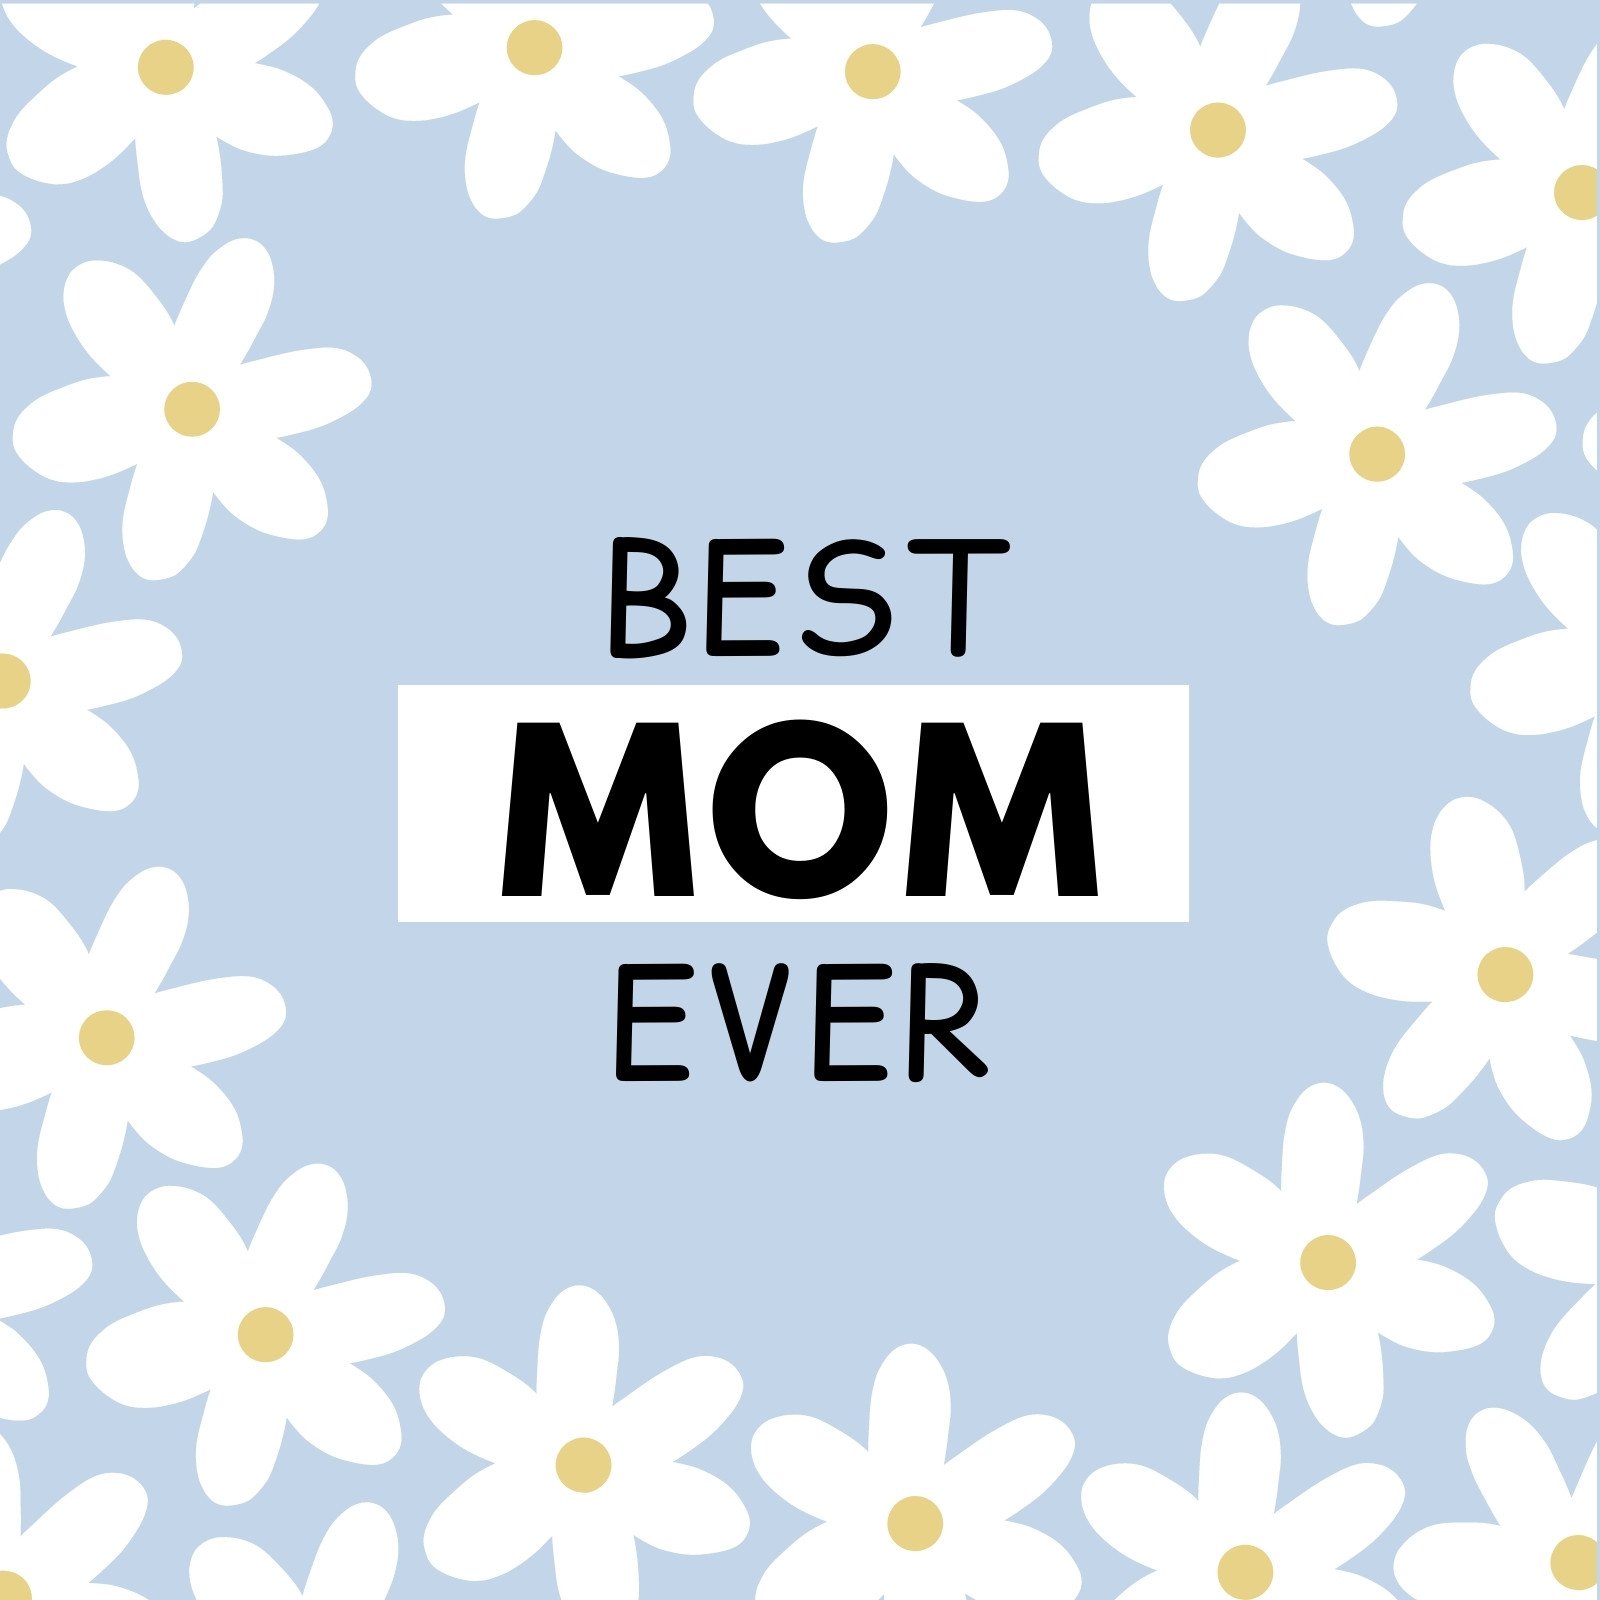 Page 2 - Free and customizable mom templates